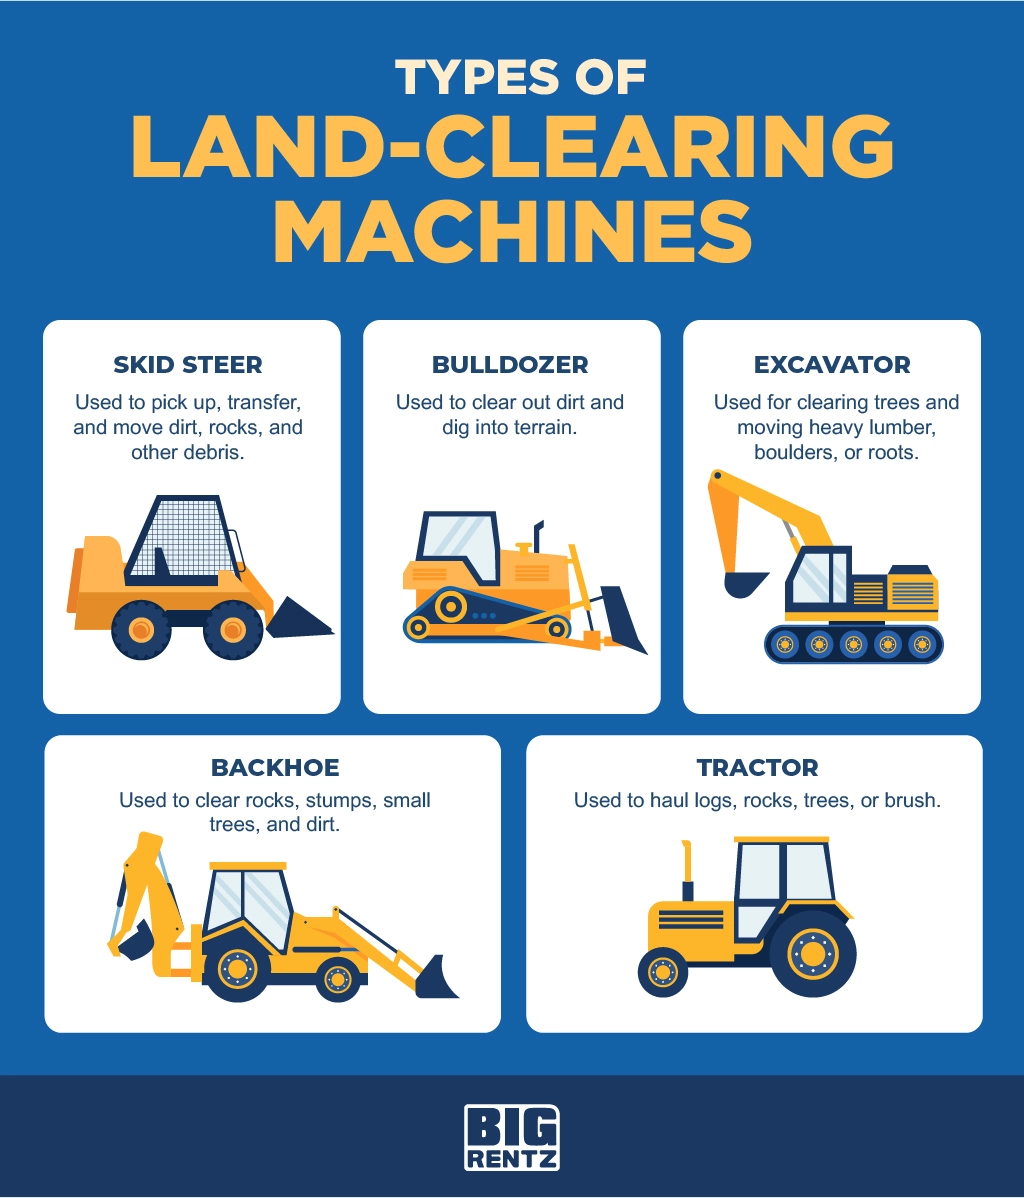 Lot Clearing Equipment: Tools for Efficiency